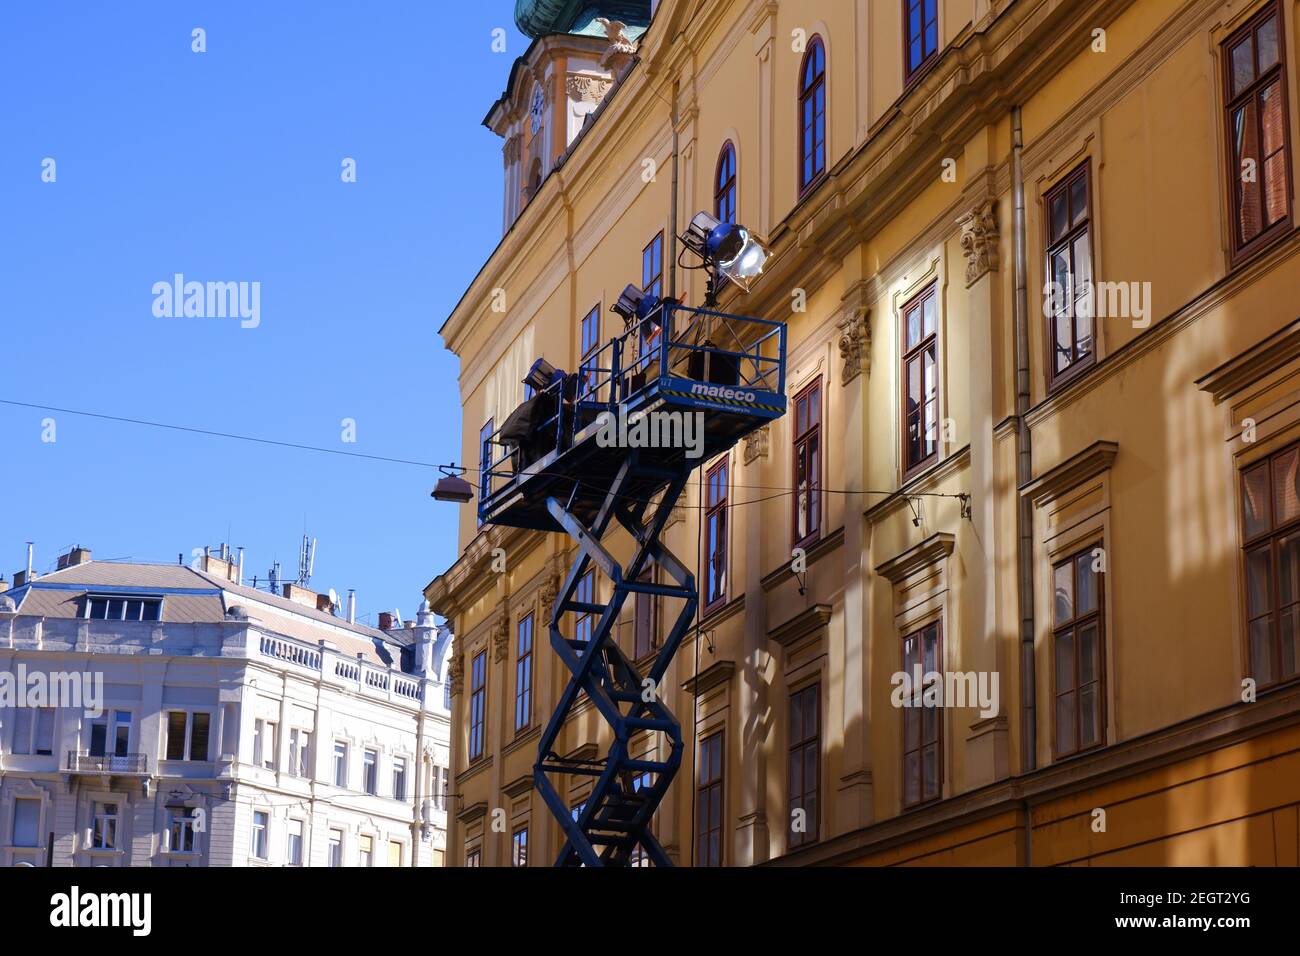 Budapest, Hungary - February 18, 2021: shooting scene with a crane with cameras and lighting in front of a downtown house on the street Stock Photo